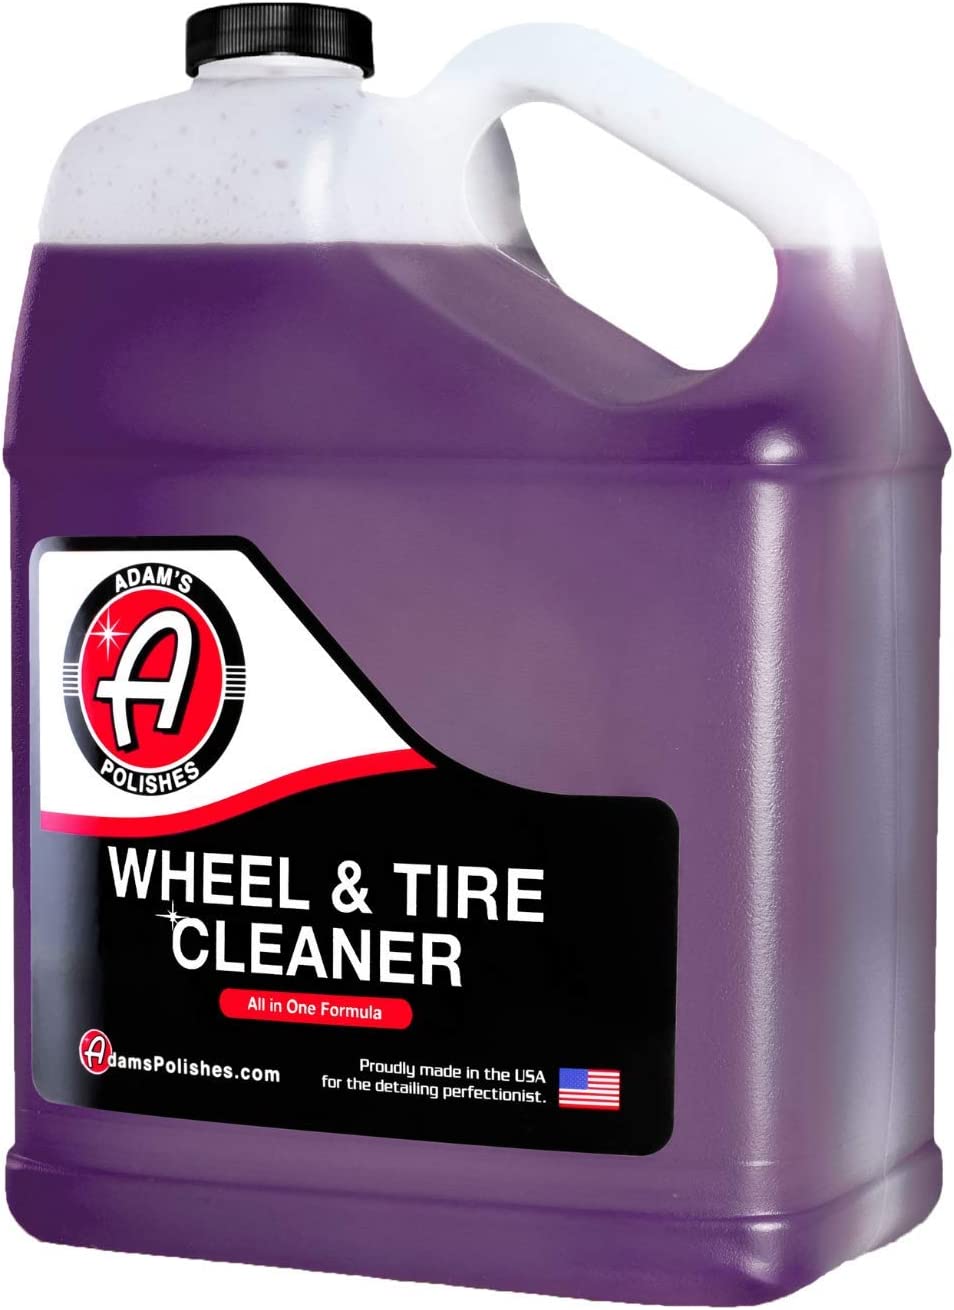 Adam’s Wheel & Tire Cleaner Gallon - Professional All In One Tire & Wheel Cleaner - Amazon - $31.95